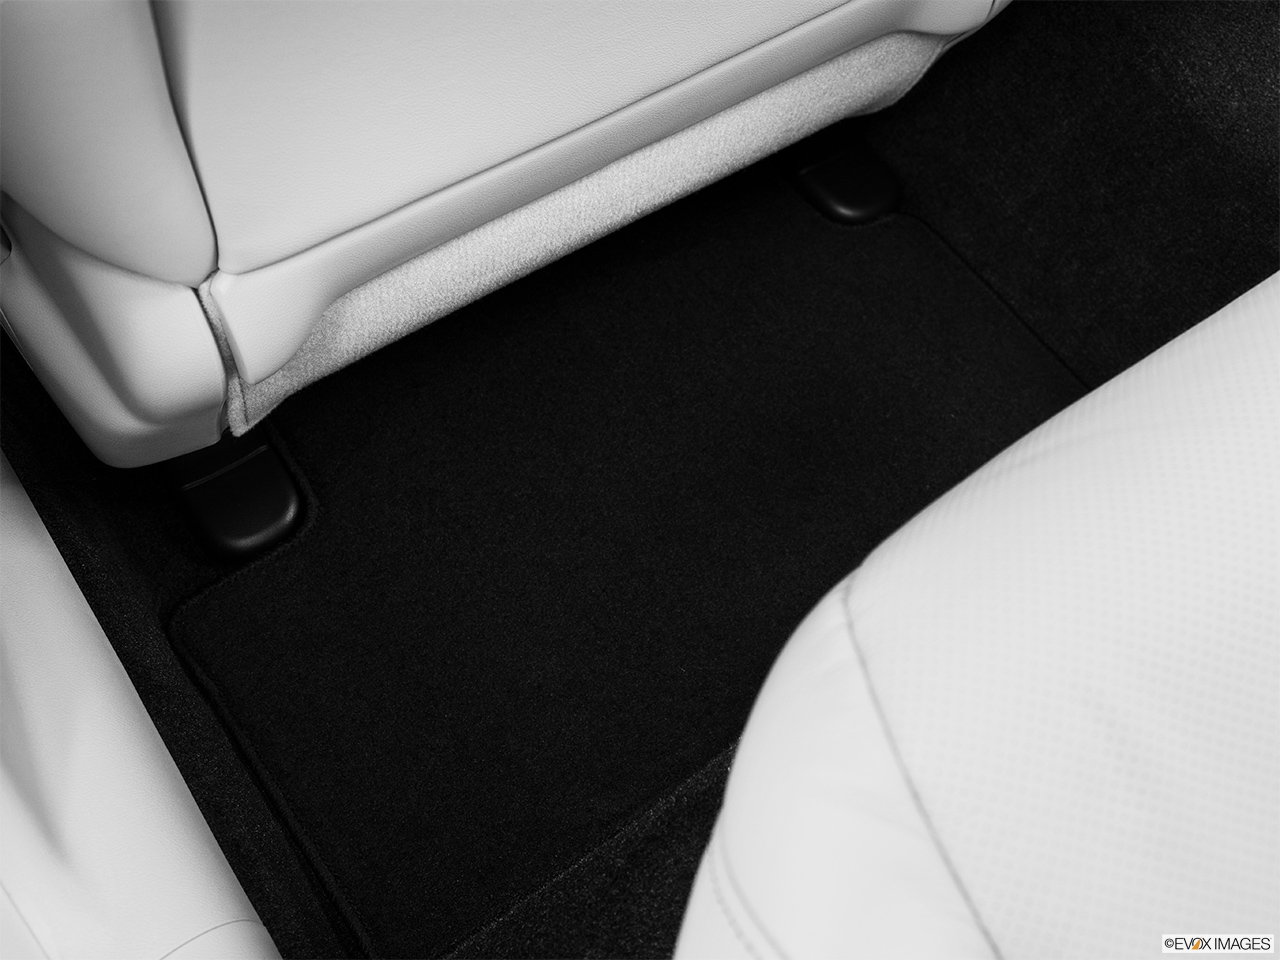 2013 Acura TSX Sport Wagon Base Rear driver's side floor mat. Mid-seat level from outside looking in. 